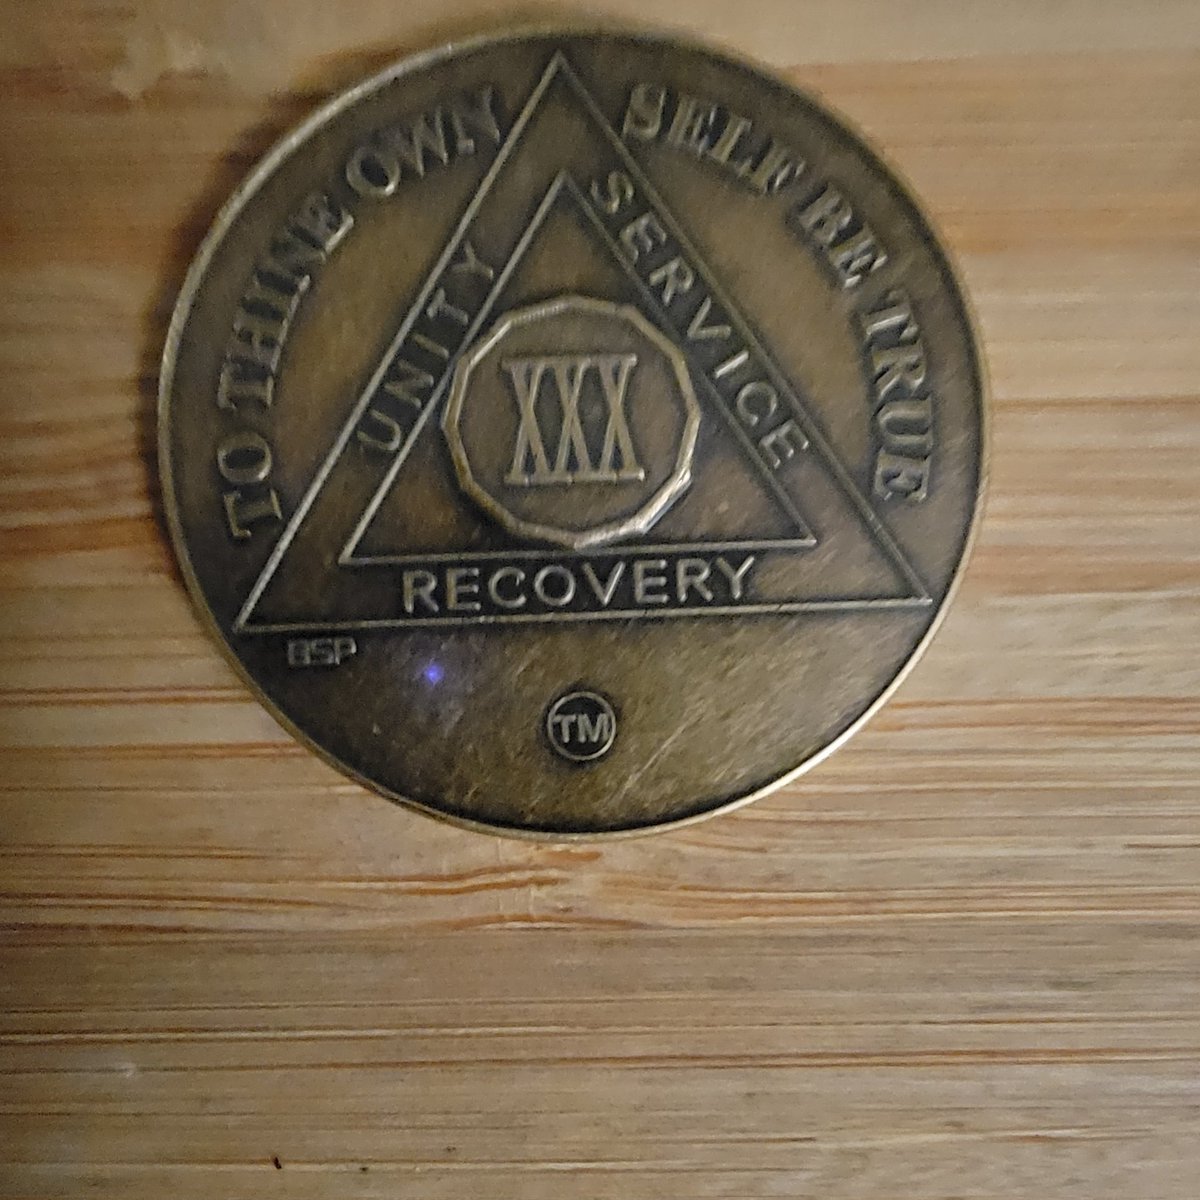 After this respiratory infection, finally made it to meeting. Collected my 1st in person chip.1/28/1994
#RecoveryPosse #sober #soberaf #sobriety #soberlife #ODAAT